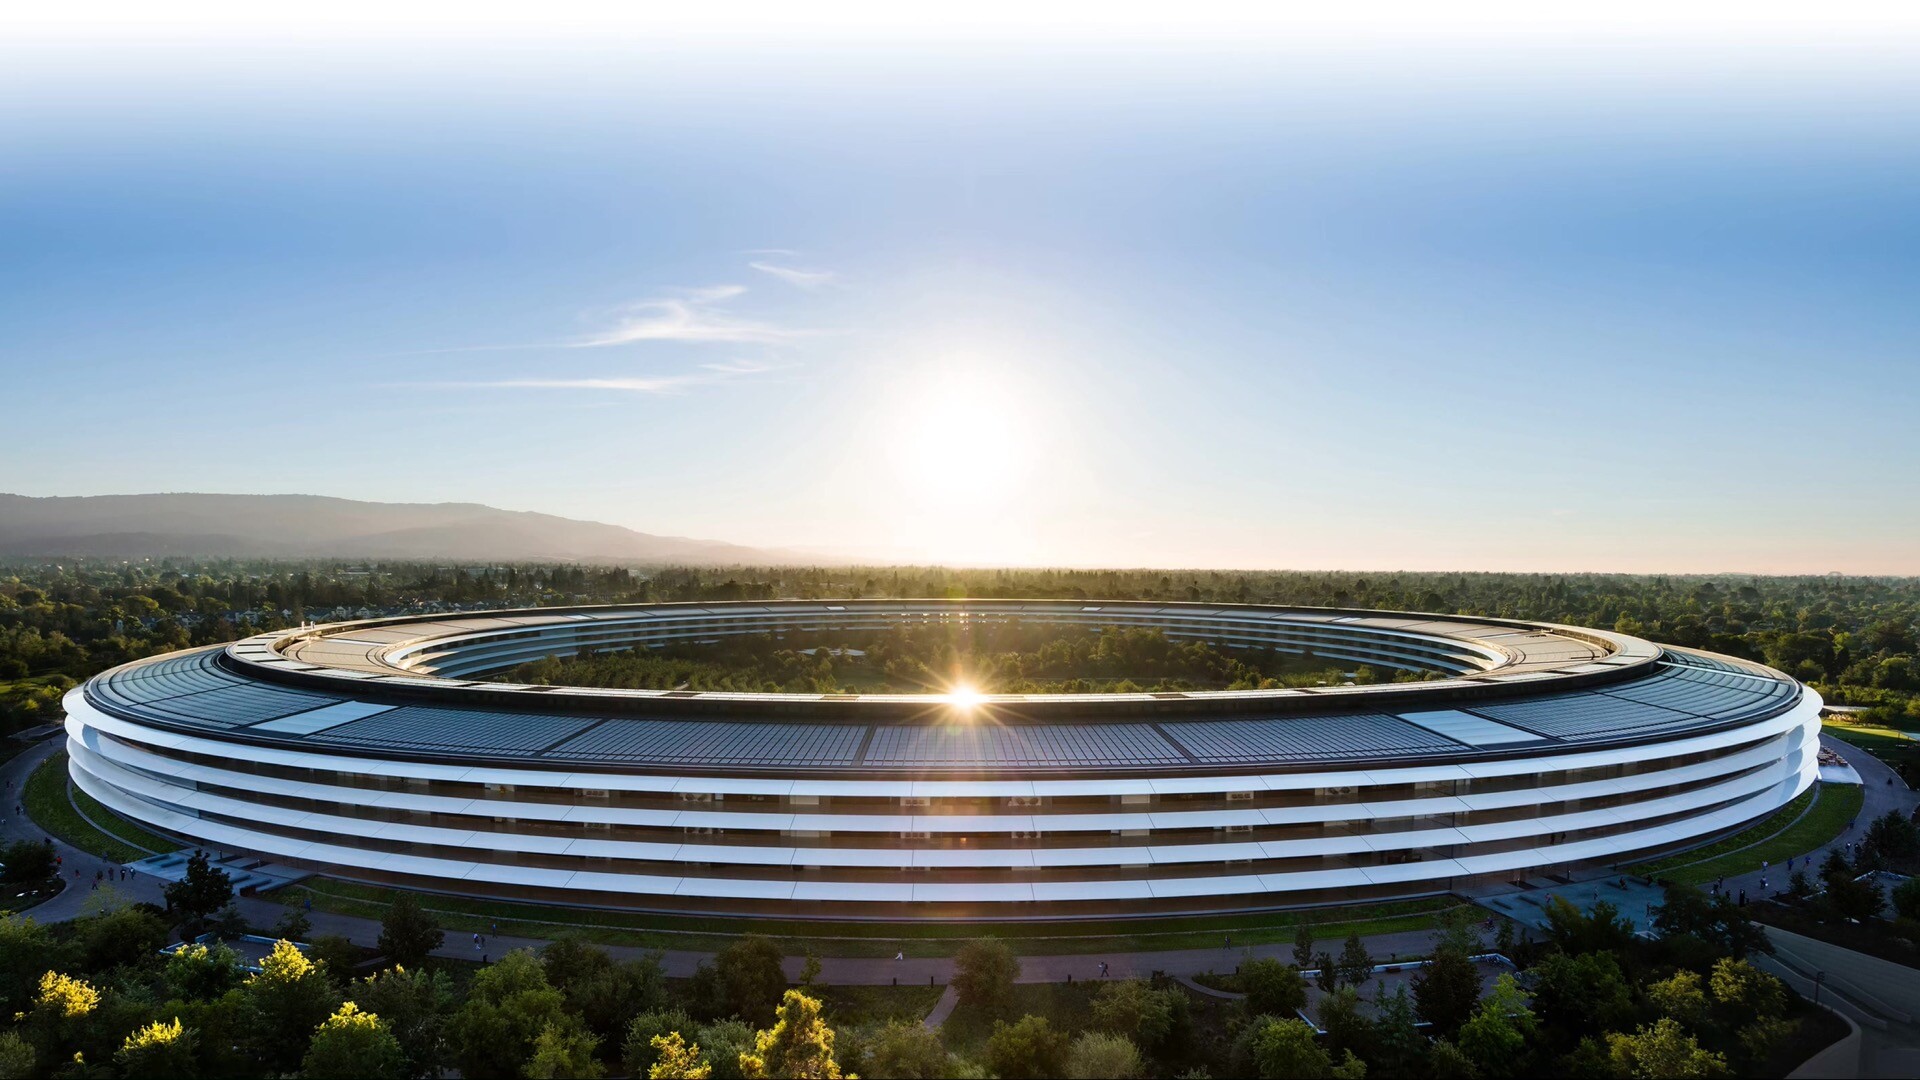 New photos of the interior and exterior of Apple's Norman Foster-designed campus | News | Archinect